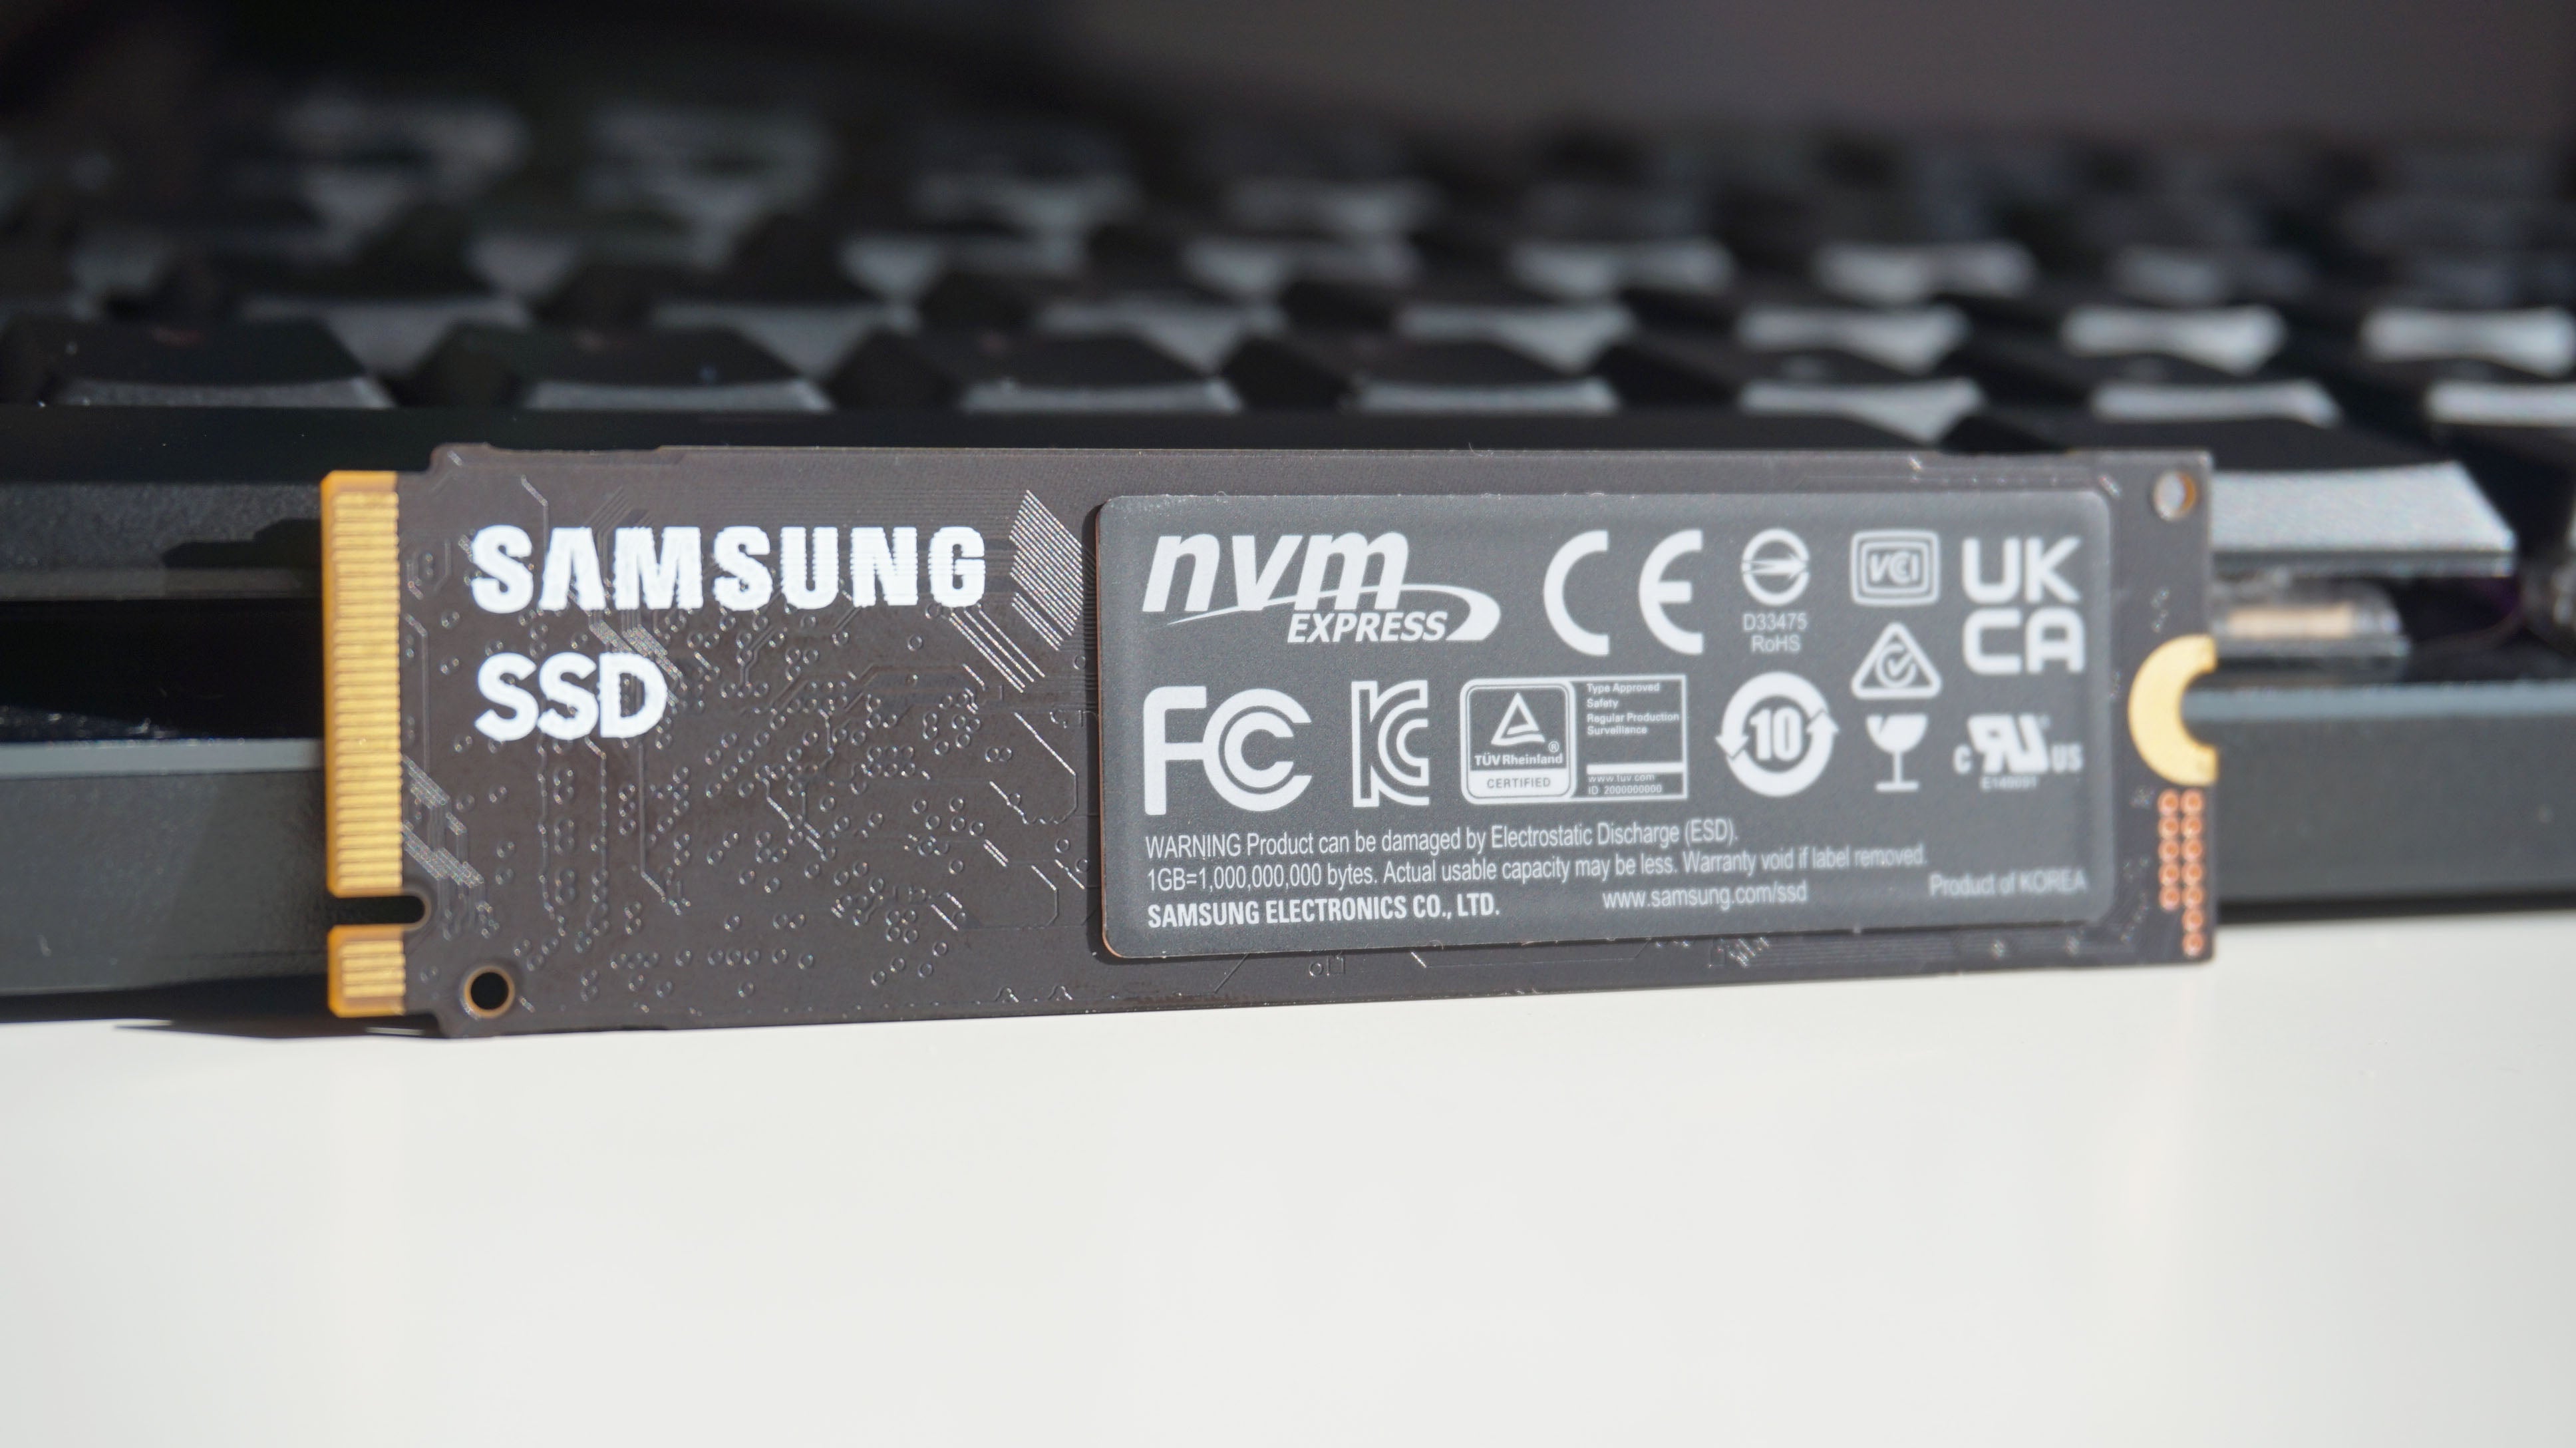 The back of the Samsung 980 SSD